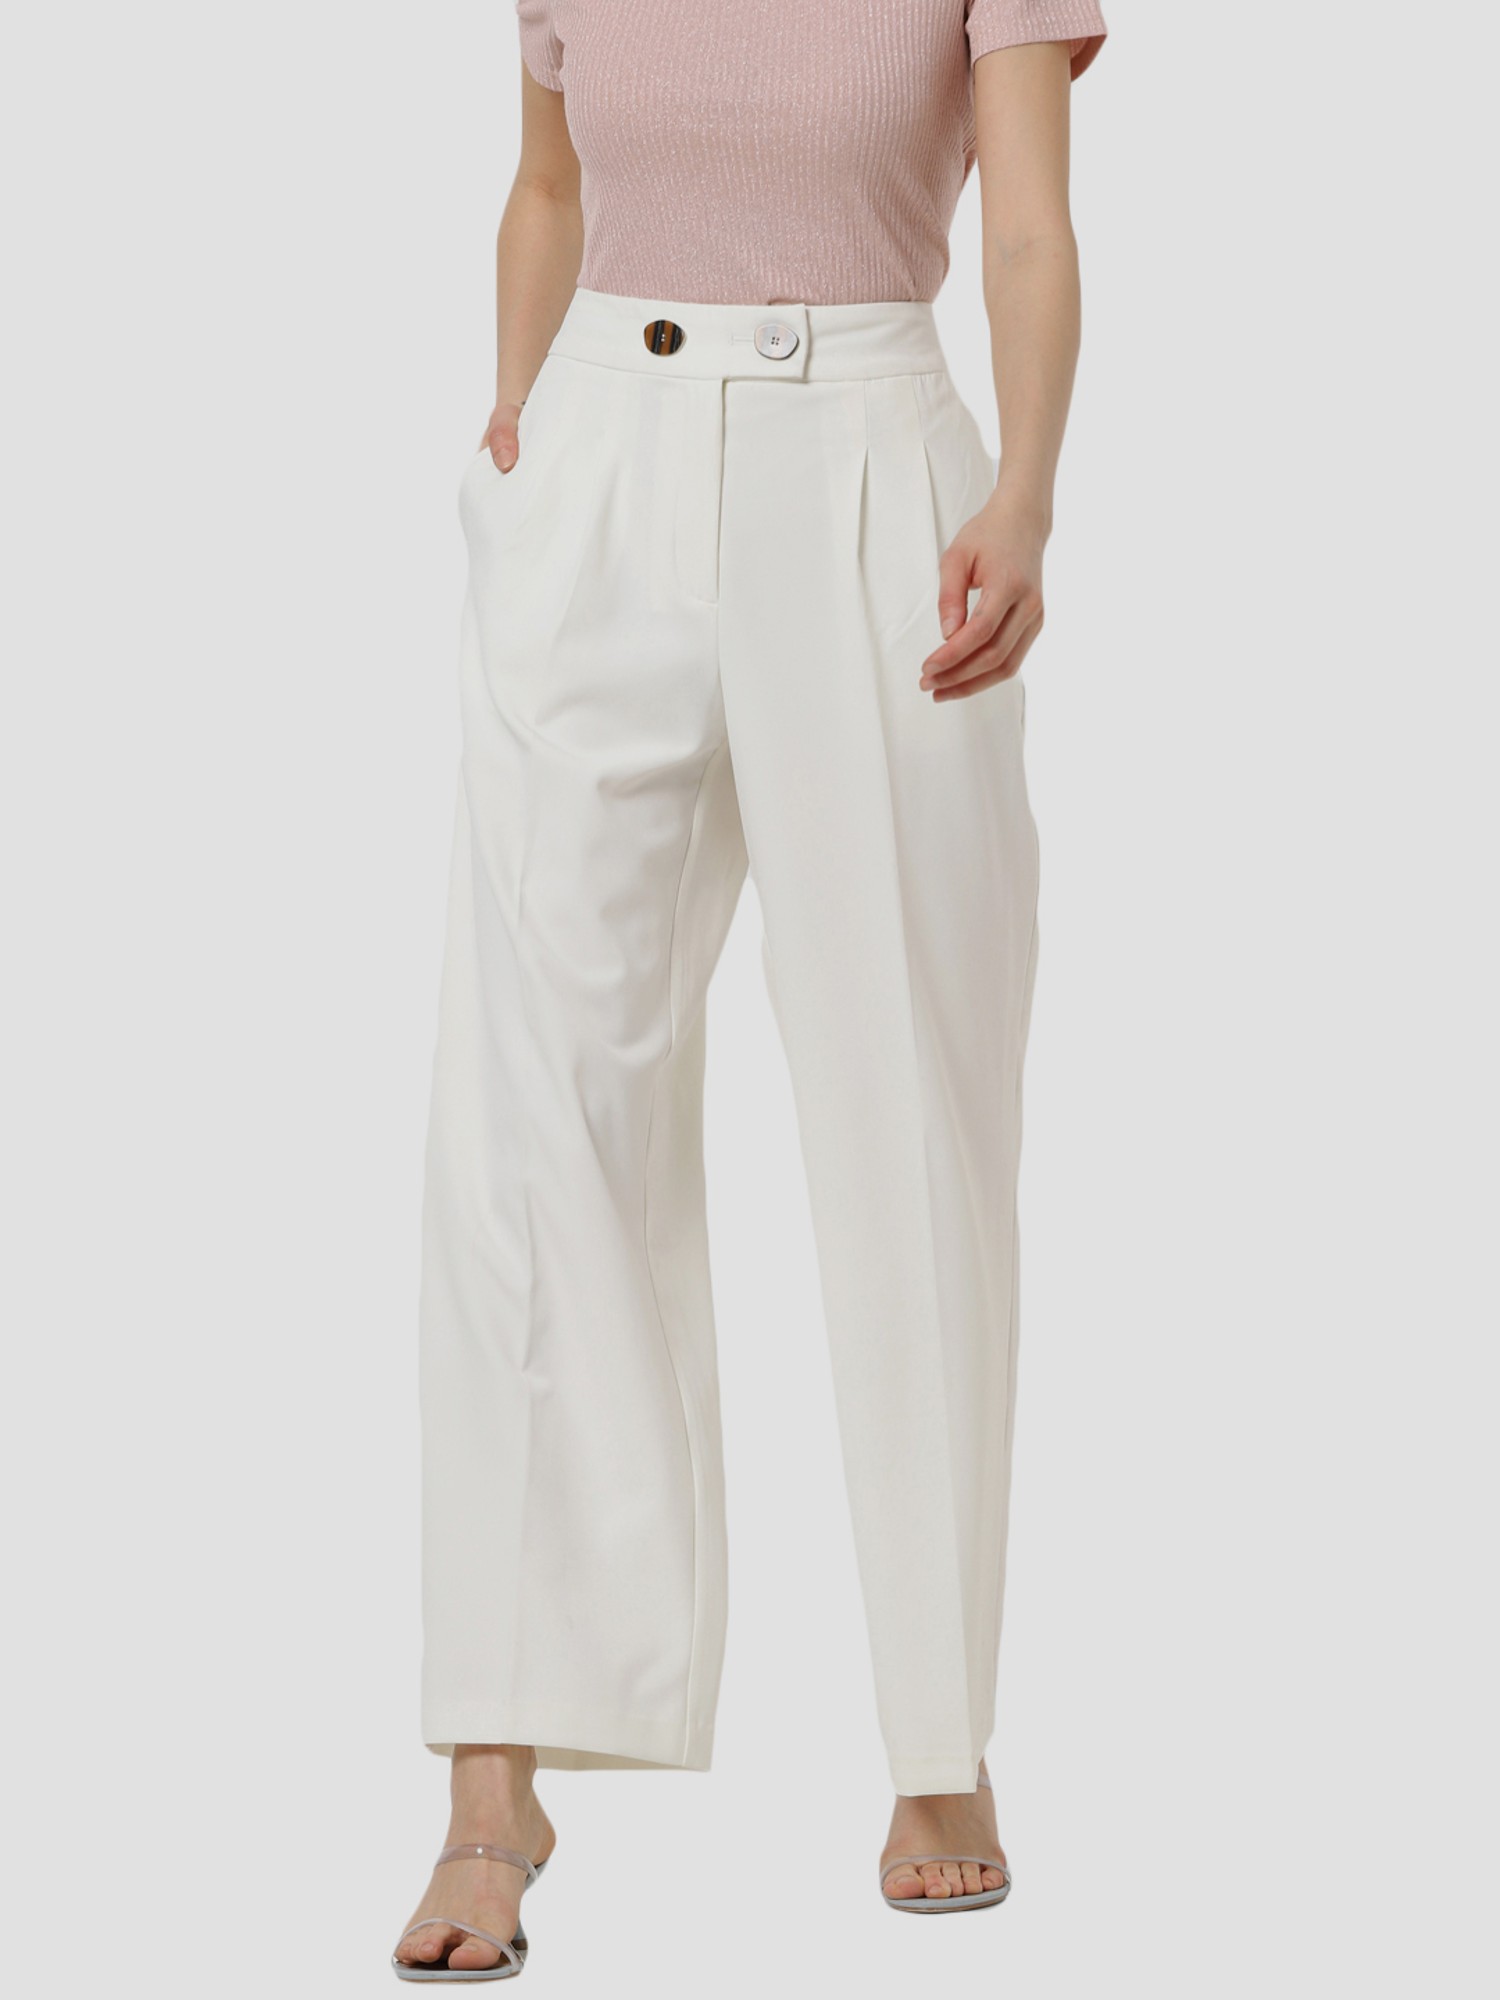 High Waist Trousers For Womens on Sale  Buy Womens Pants Online  AJIO